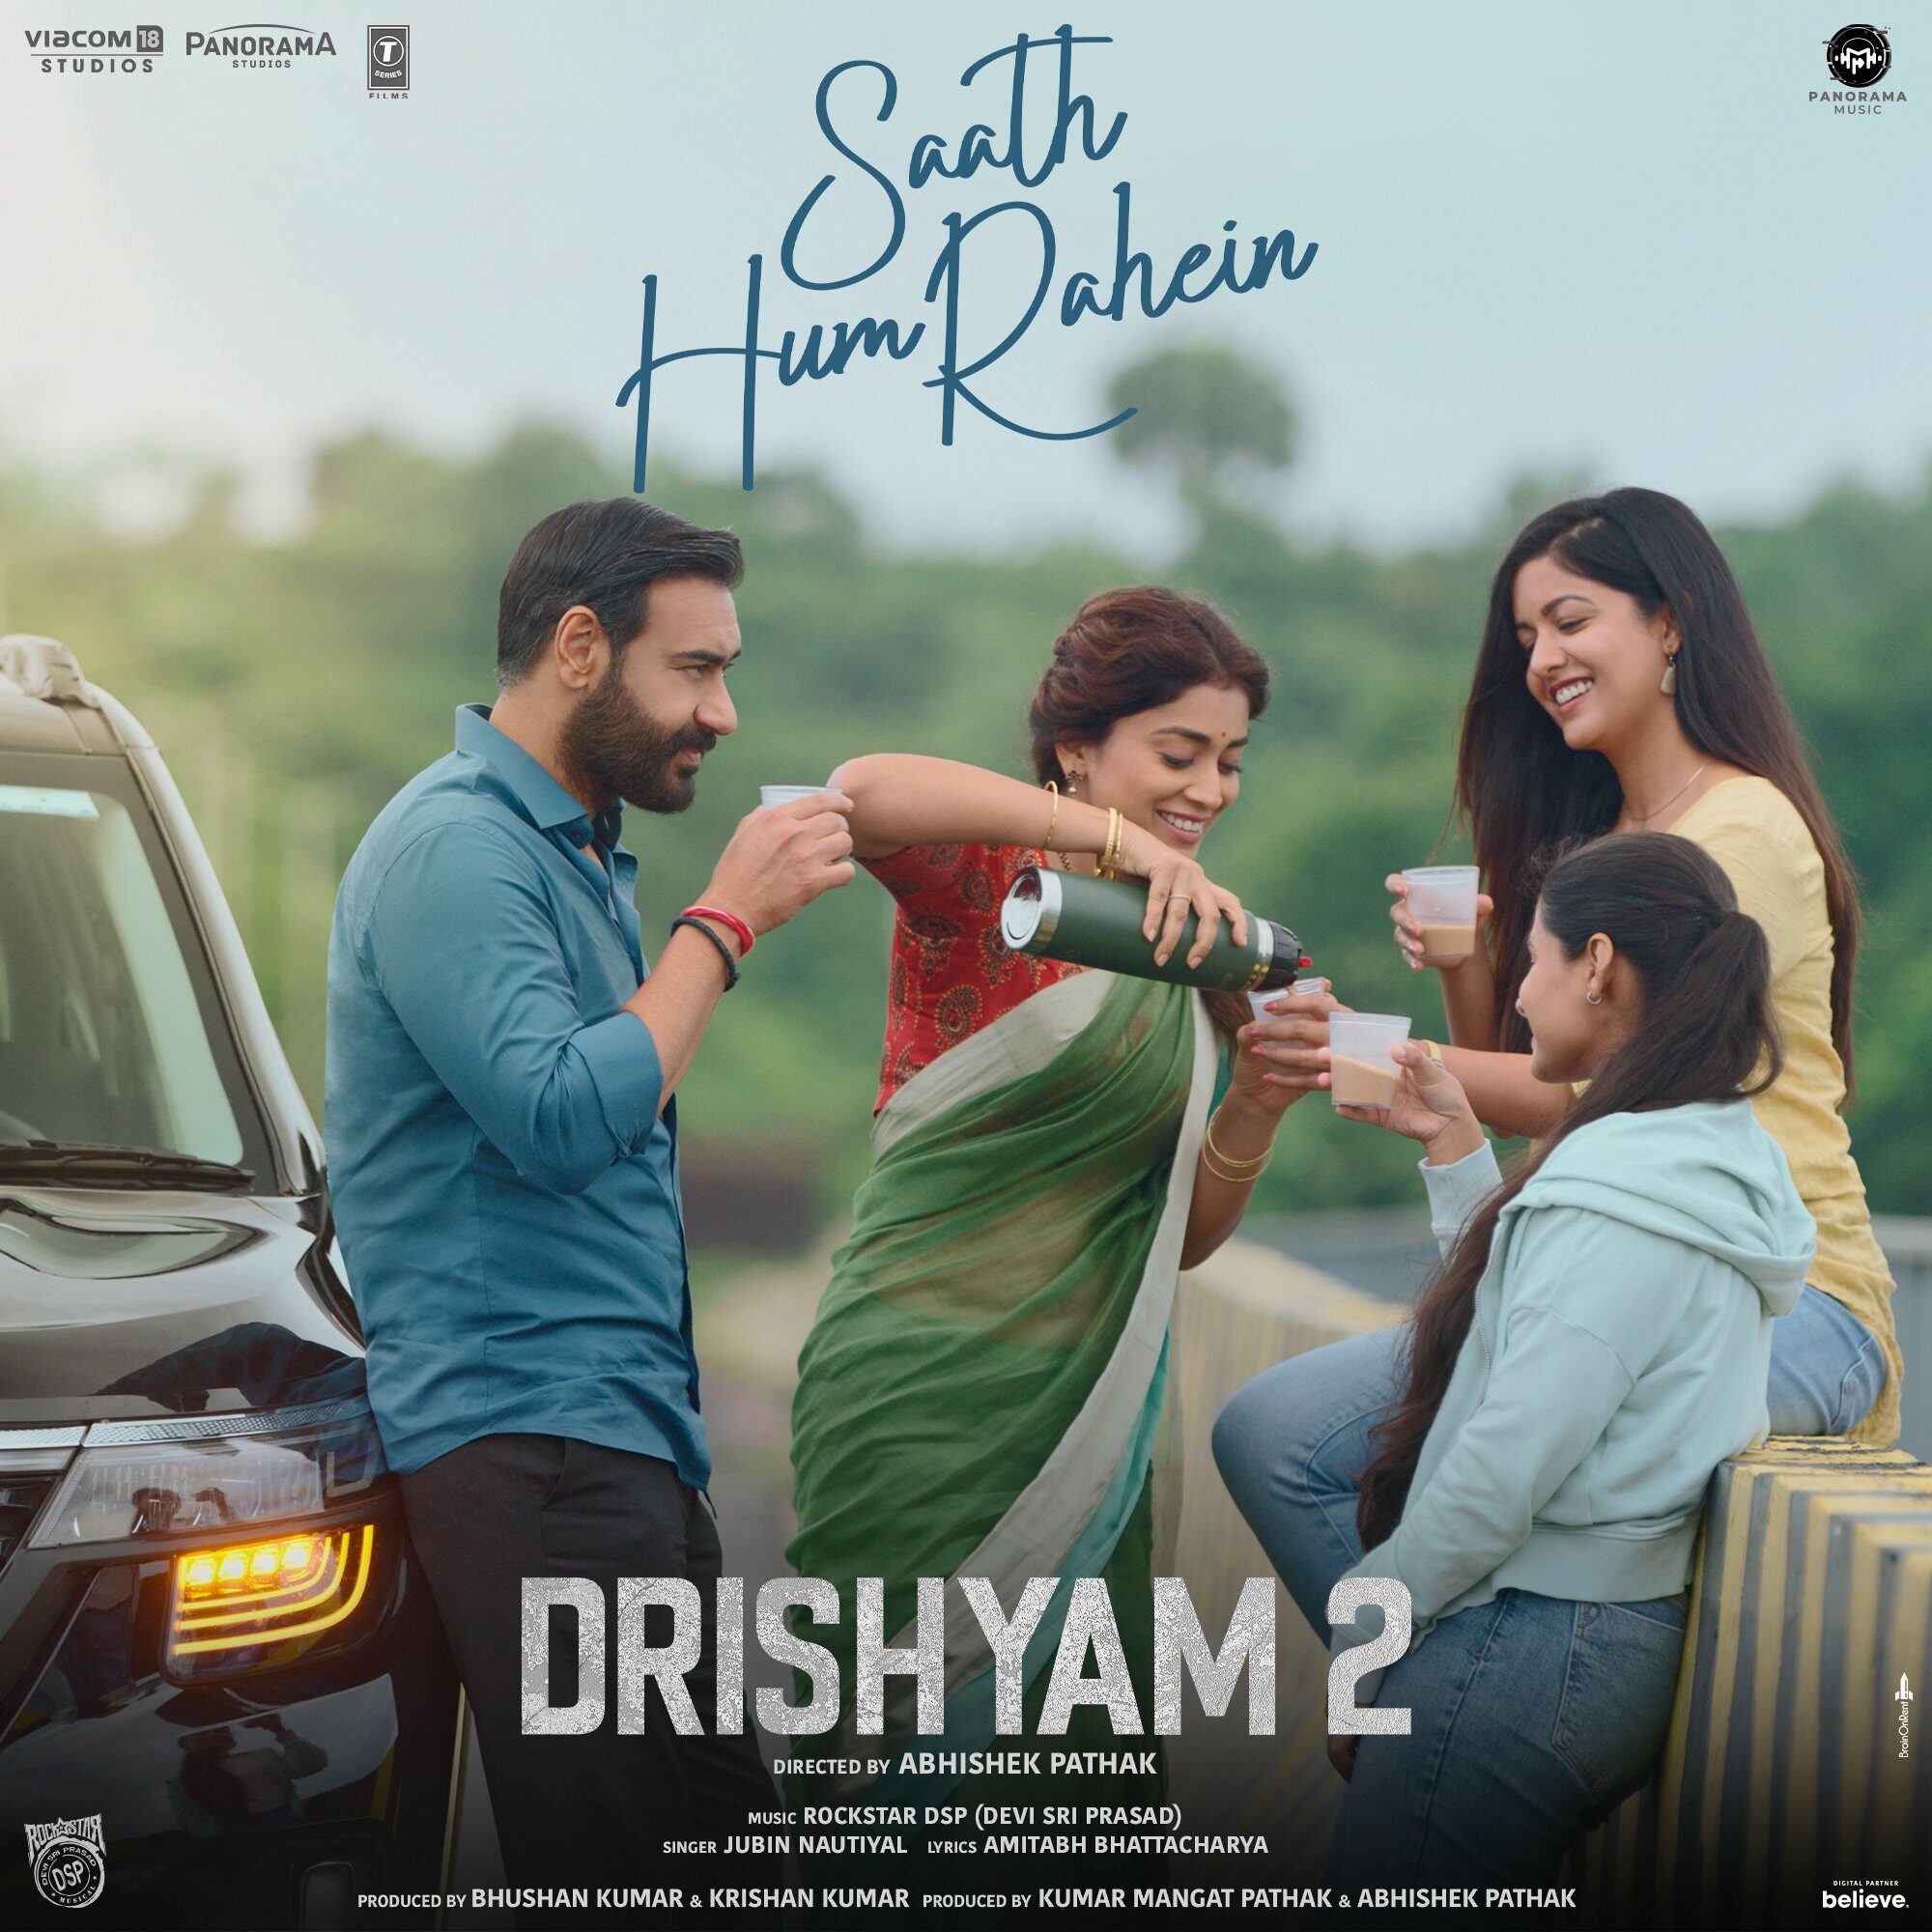 Saath Hum Rahein: First song of Drishyam 2 is all about family